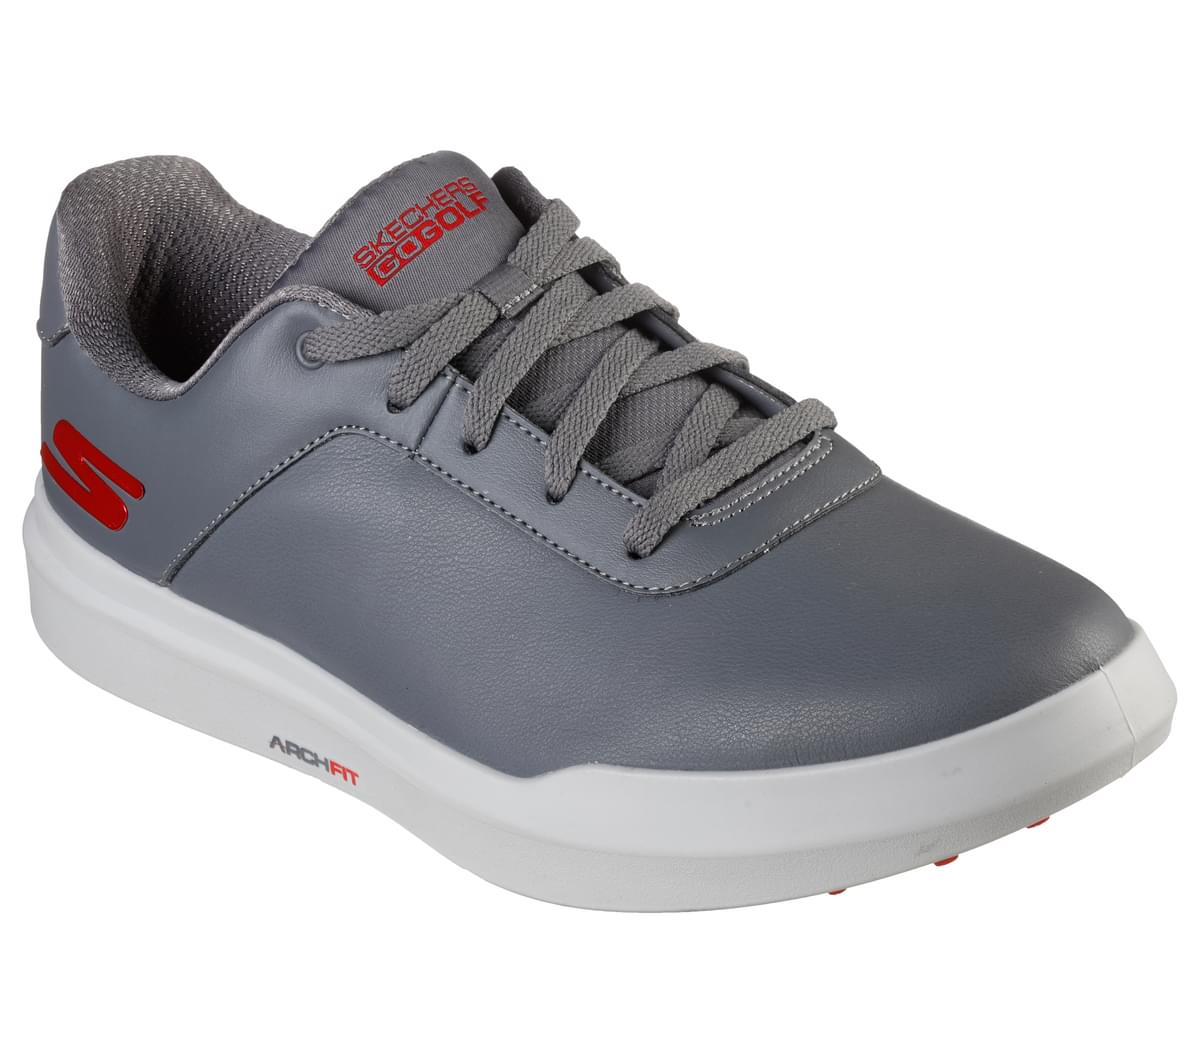 Skechers Go Golf Drive 5 Spikeless Golf Shoes 214037 Grey / Red 7 